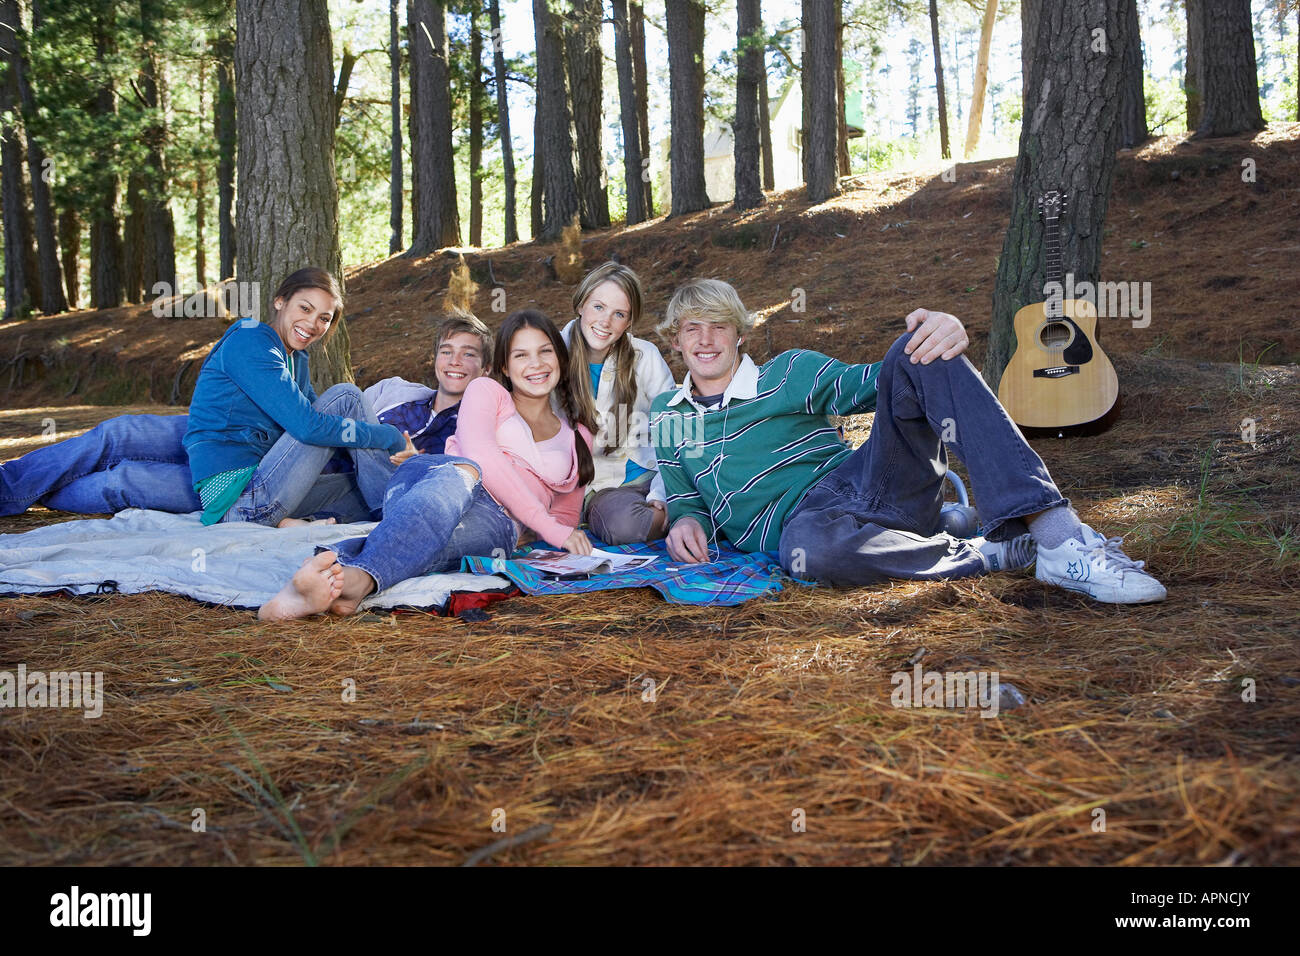 Group portrait of teenagers in forest Stock Photo